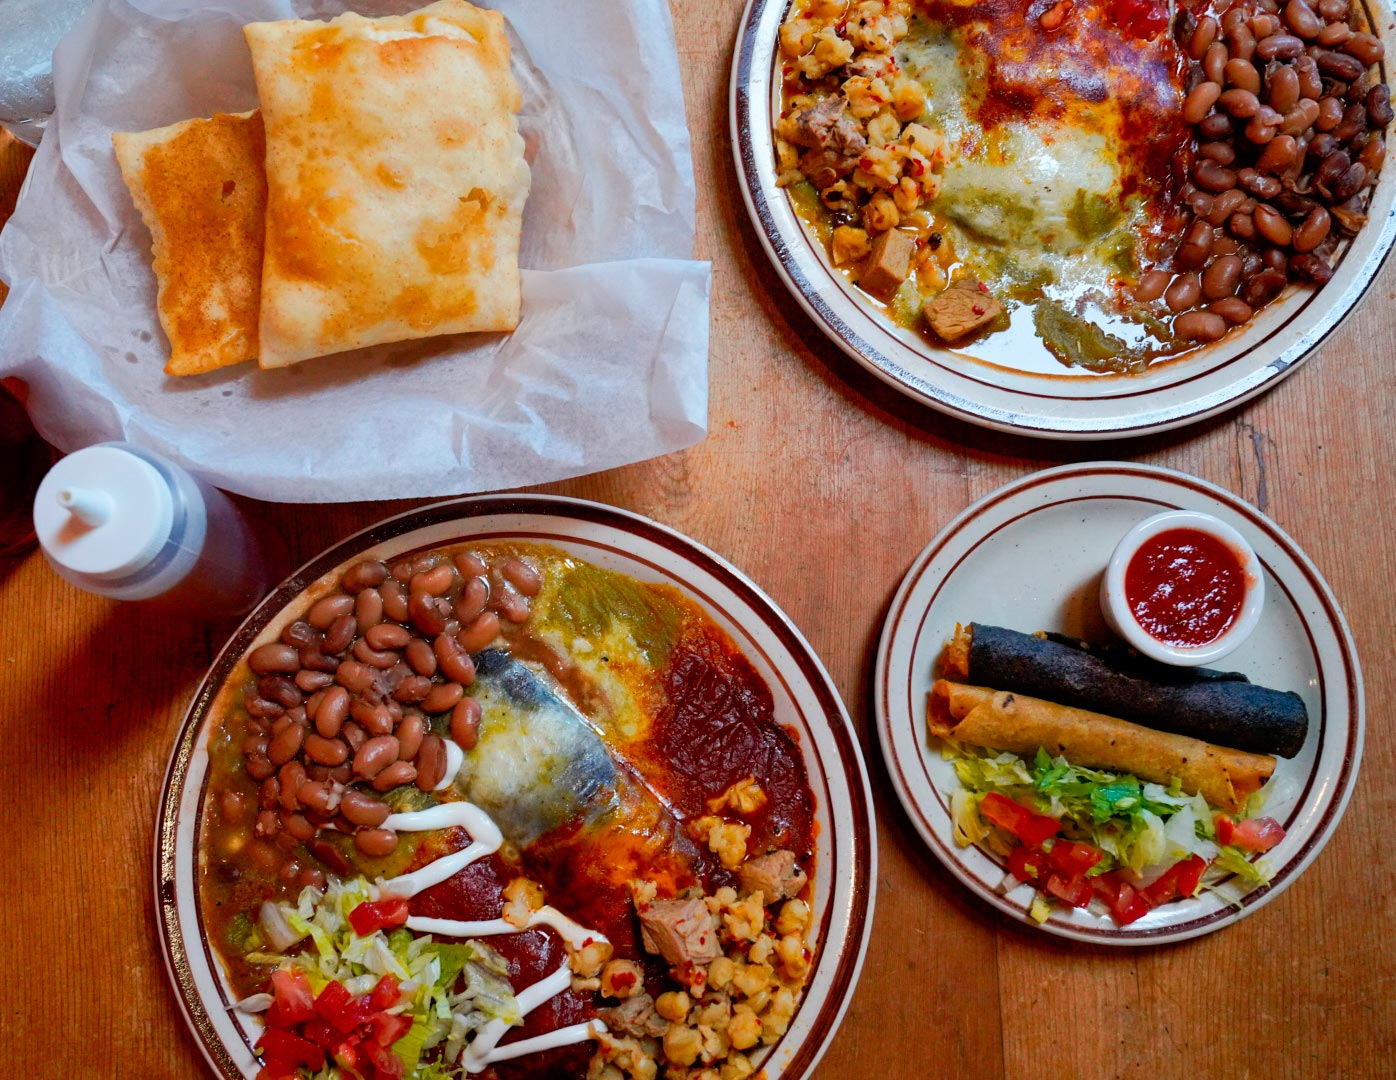 Three plates of food featuring New Mexican red and green chile, flautas, and sopapillas.